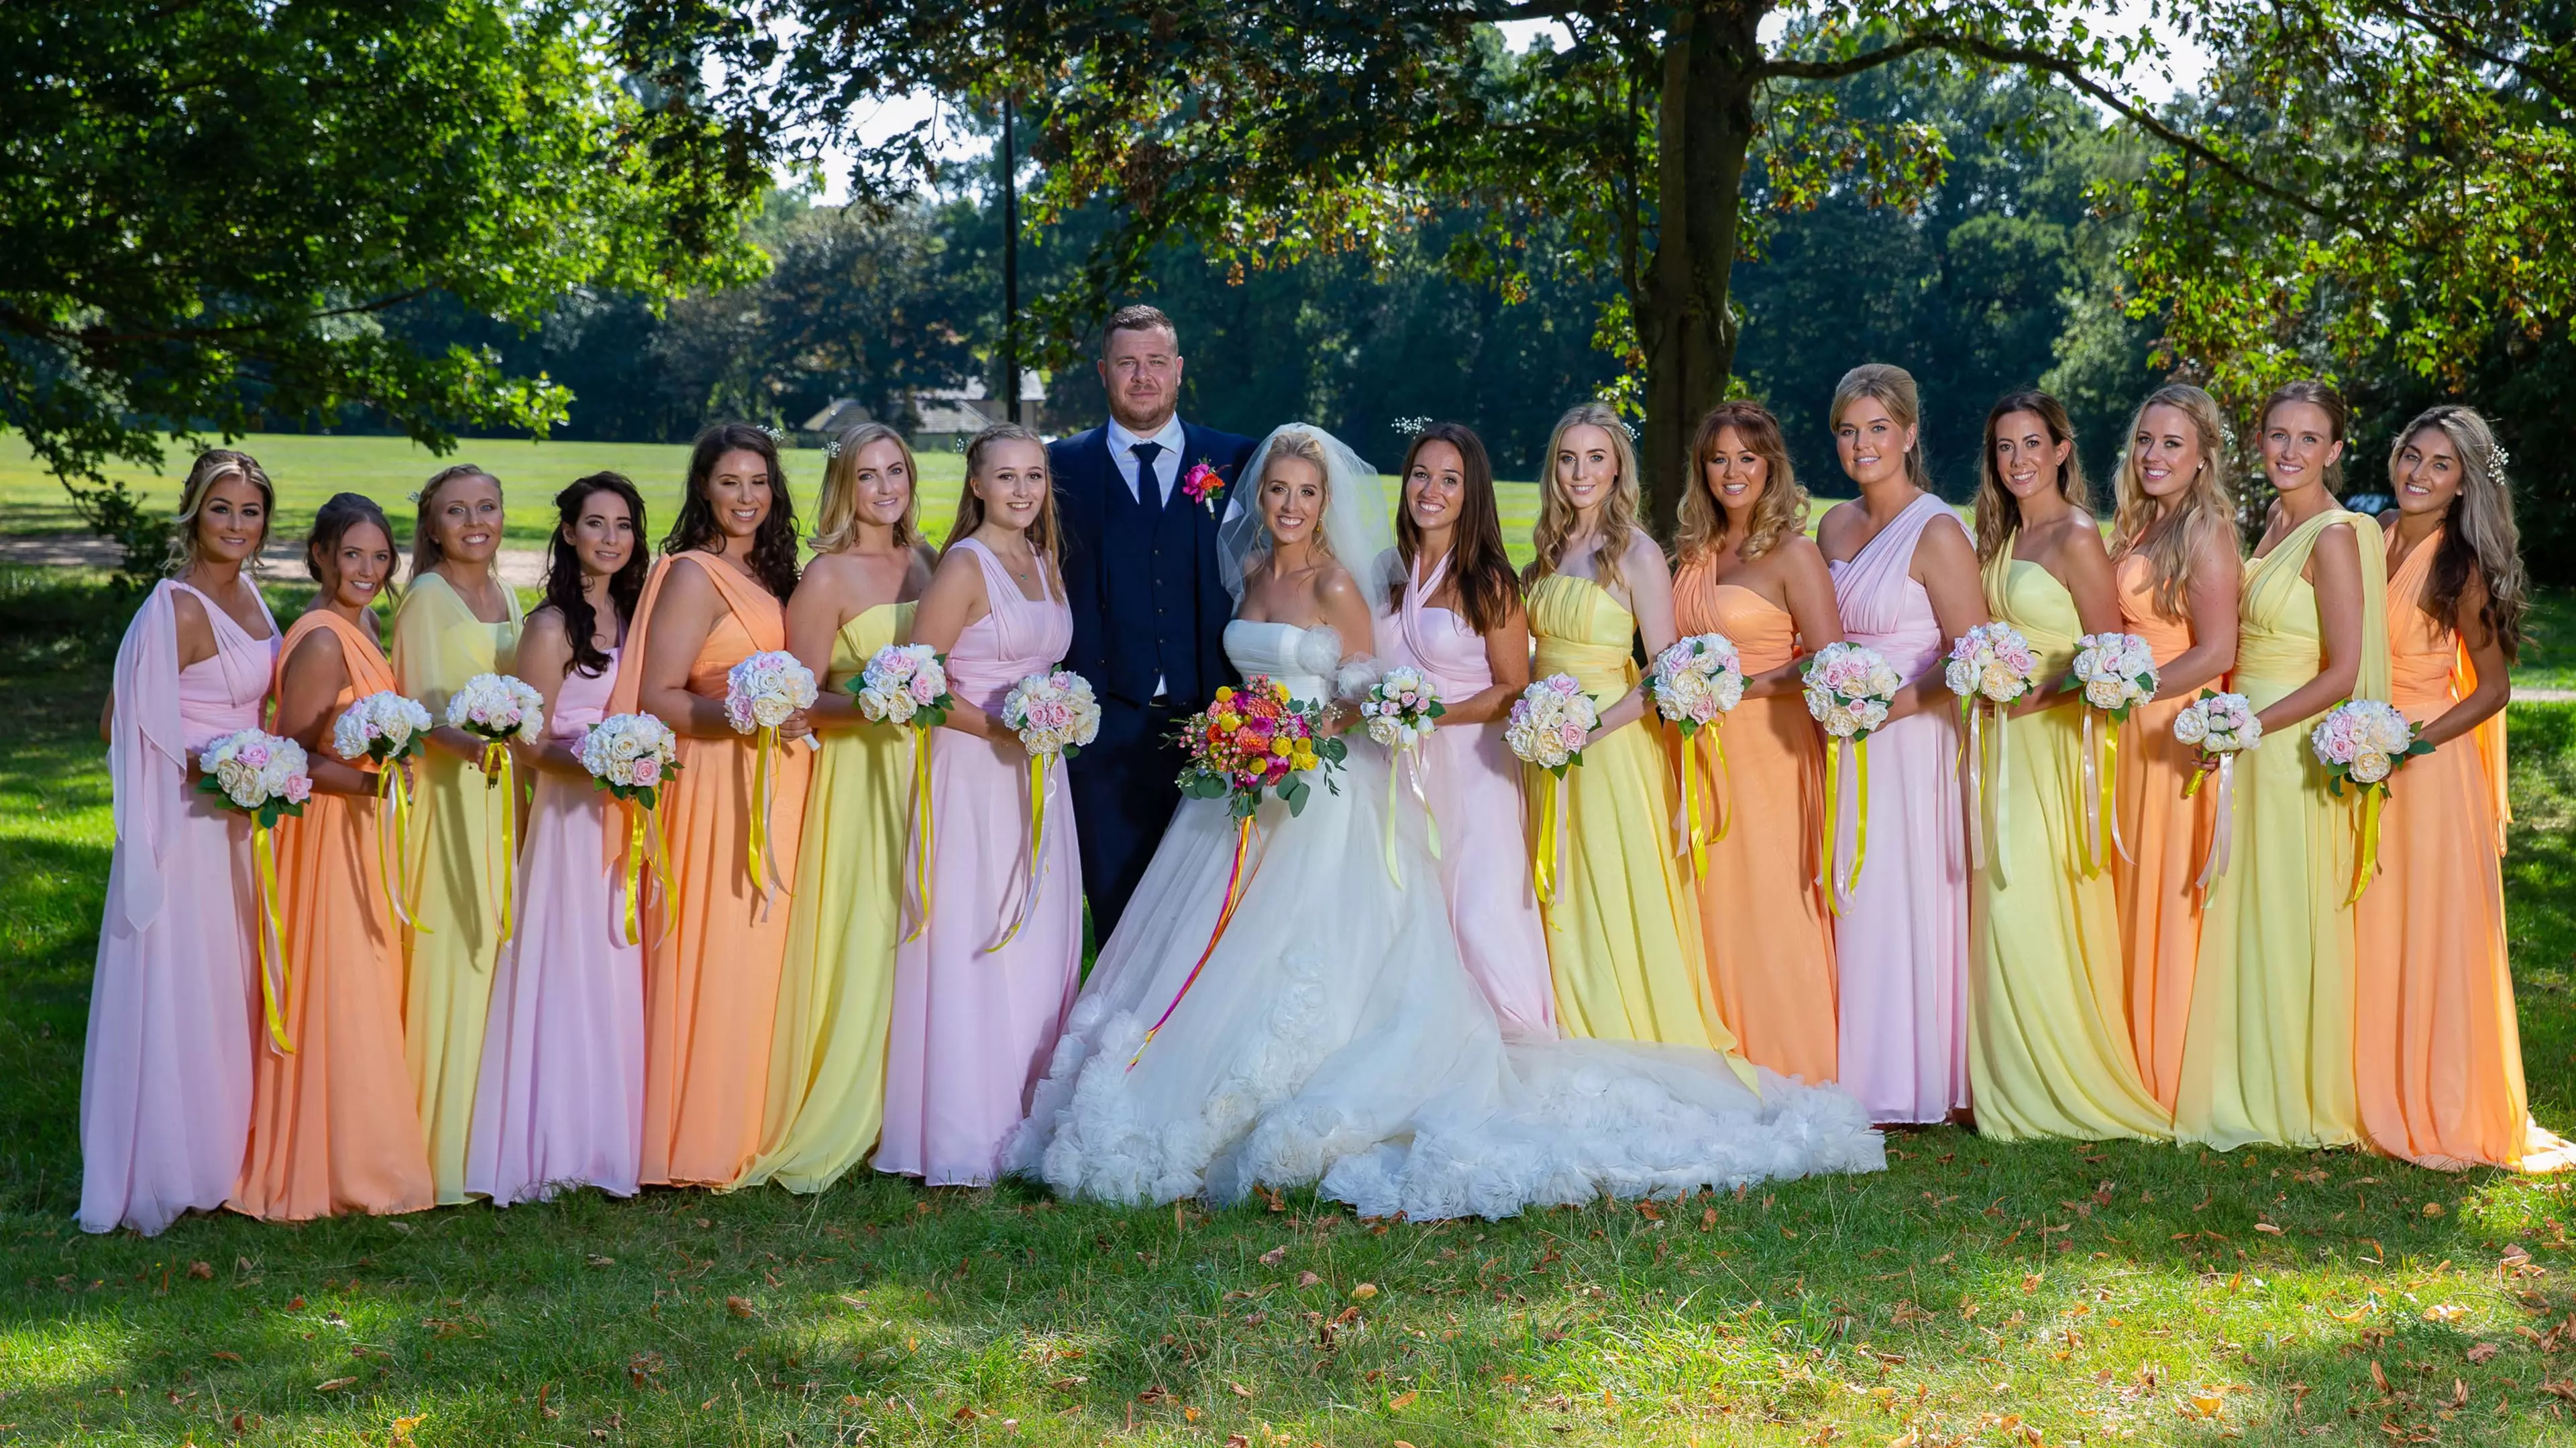 Extra AF Bride Walks Up The Aisle With No Less Than Fifteen Bridesmaids